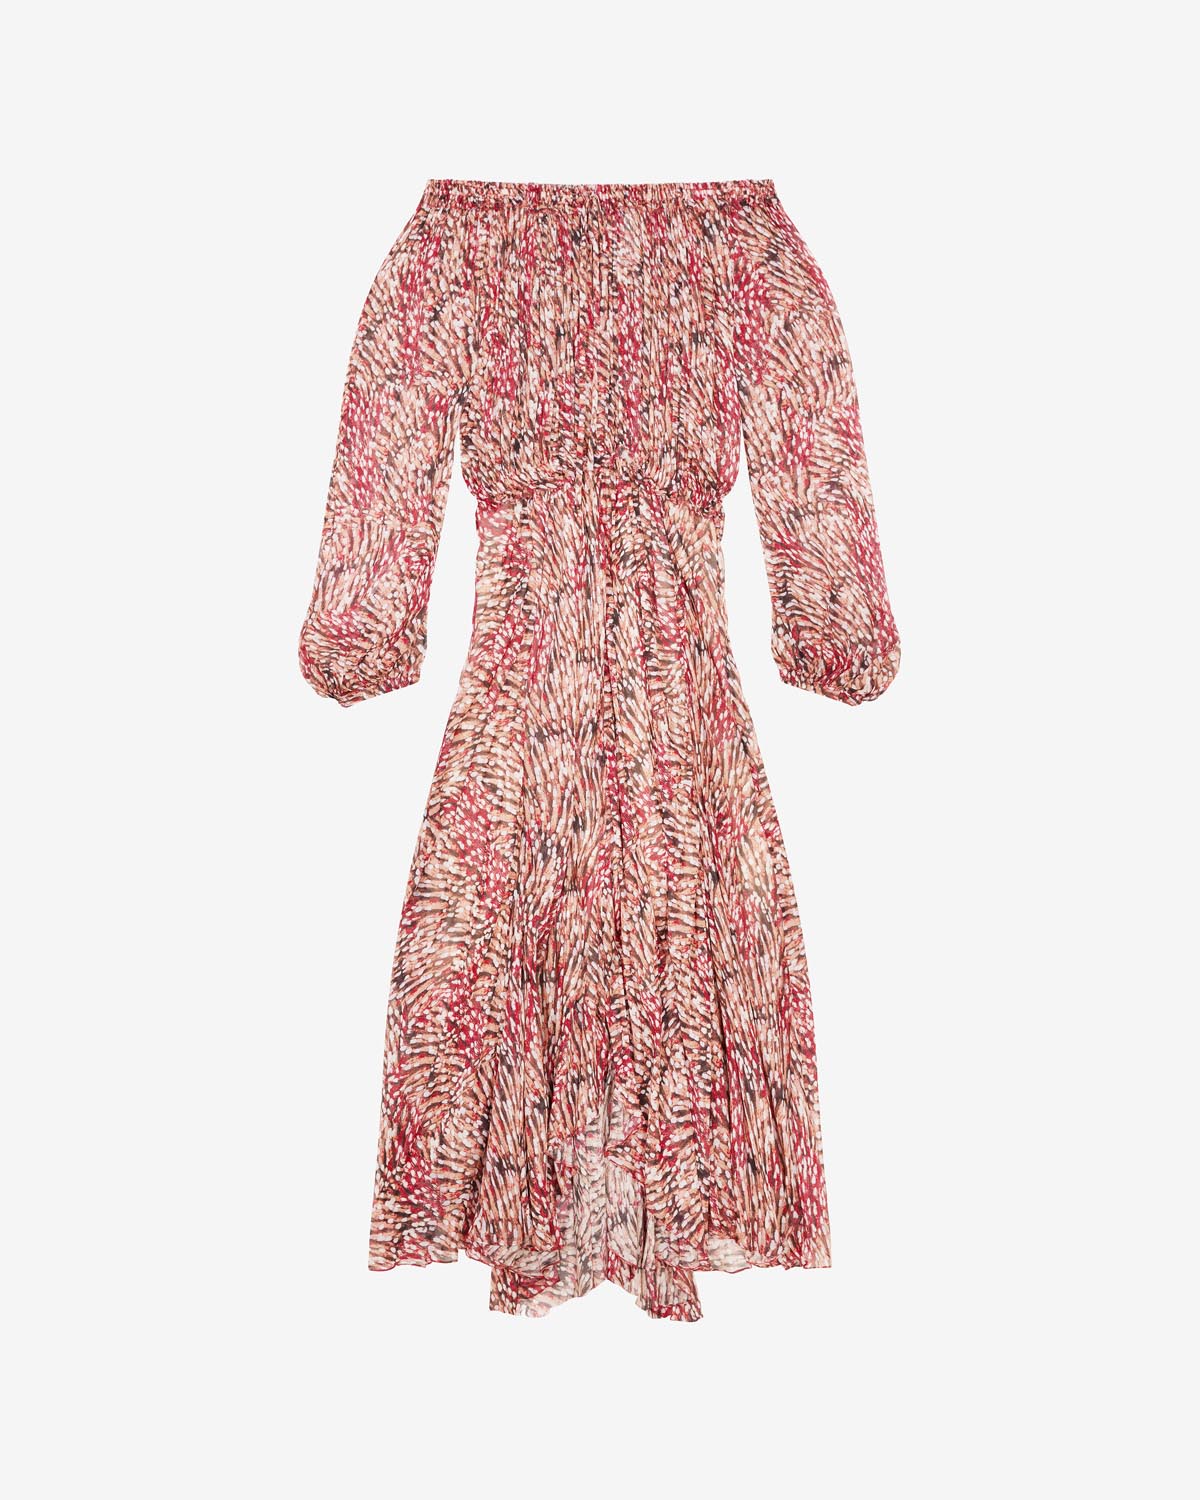 Dresses and Skirts Etoile Woman | ISABEL MARANT Official